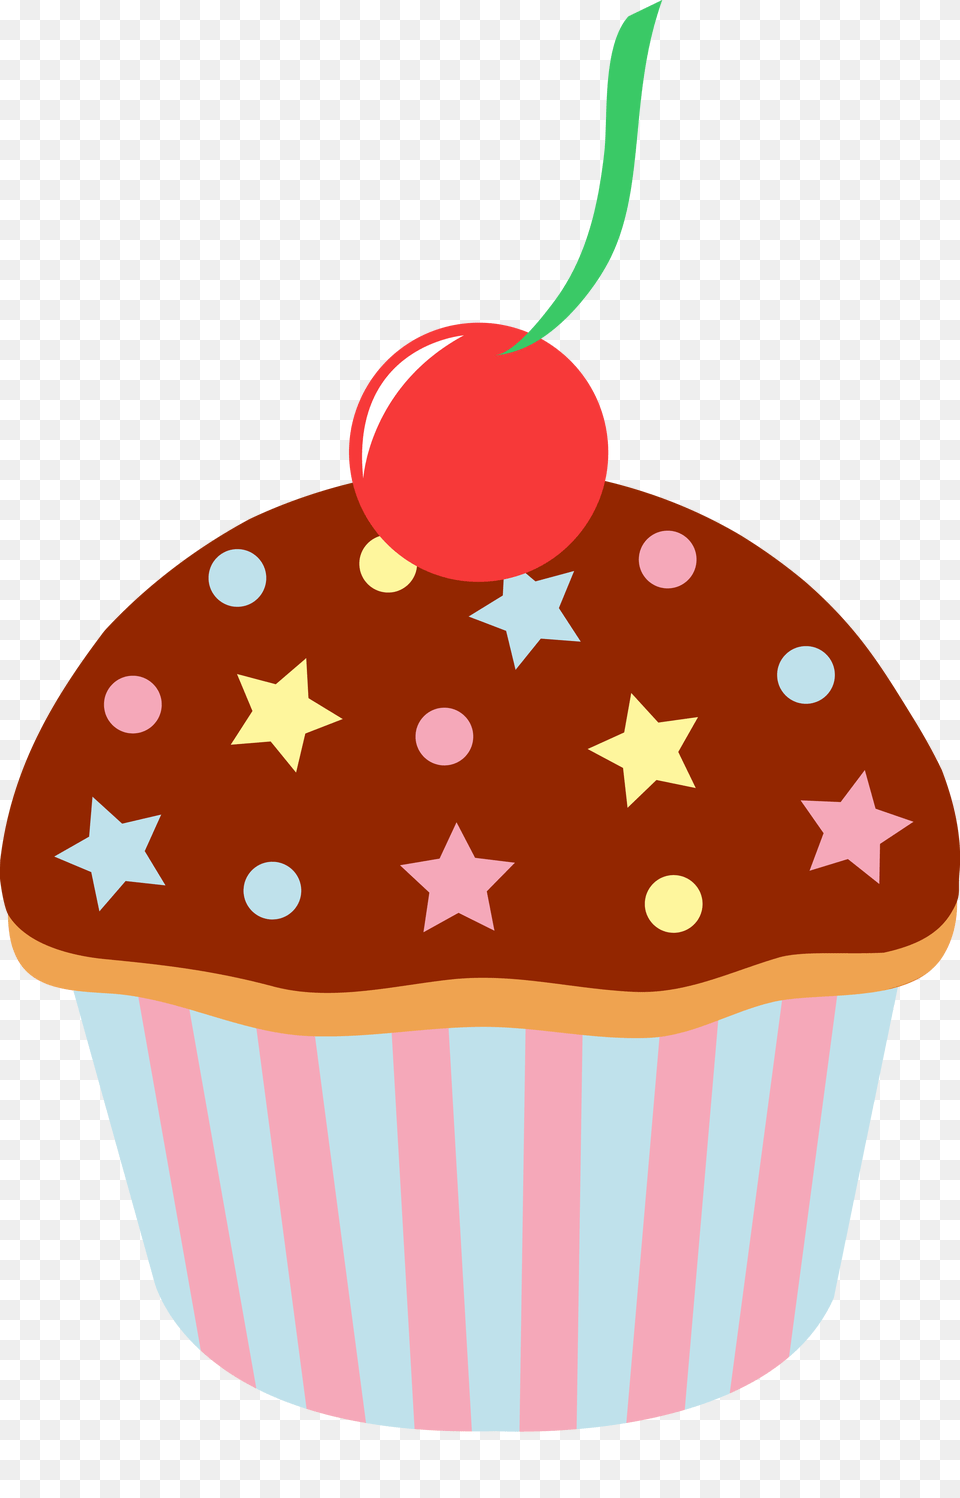 Chocolate Cupcake With Sprinkles And Cherry, Cake, Cream, Dessert, Food Free Png Download